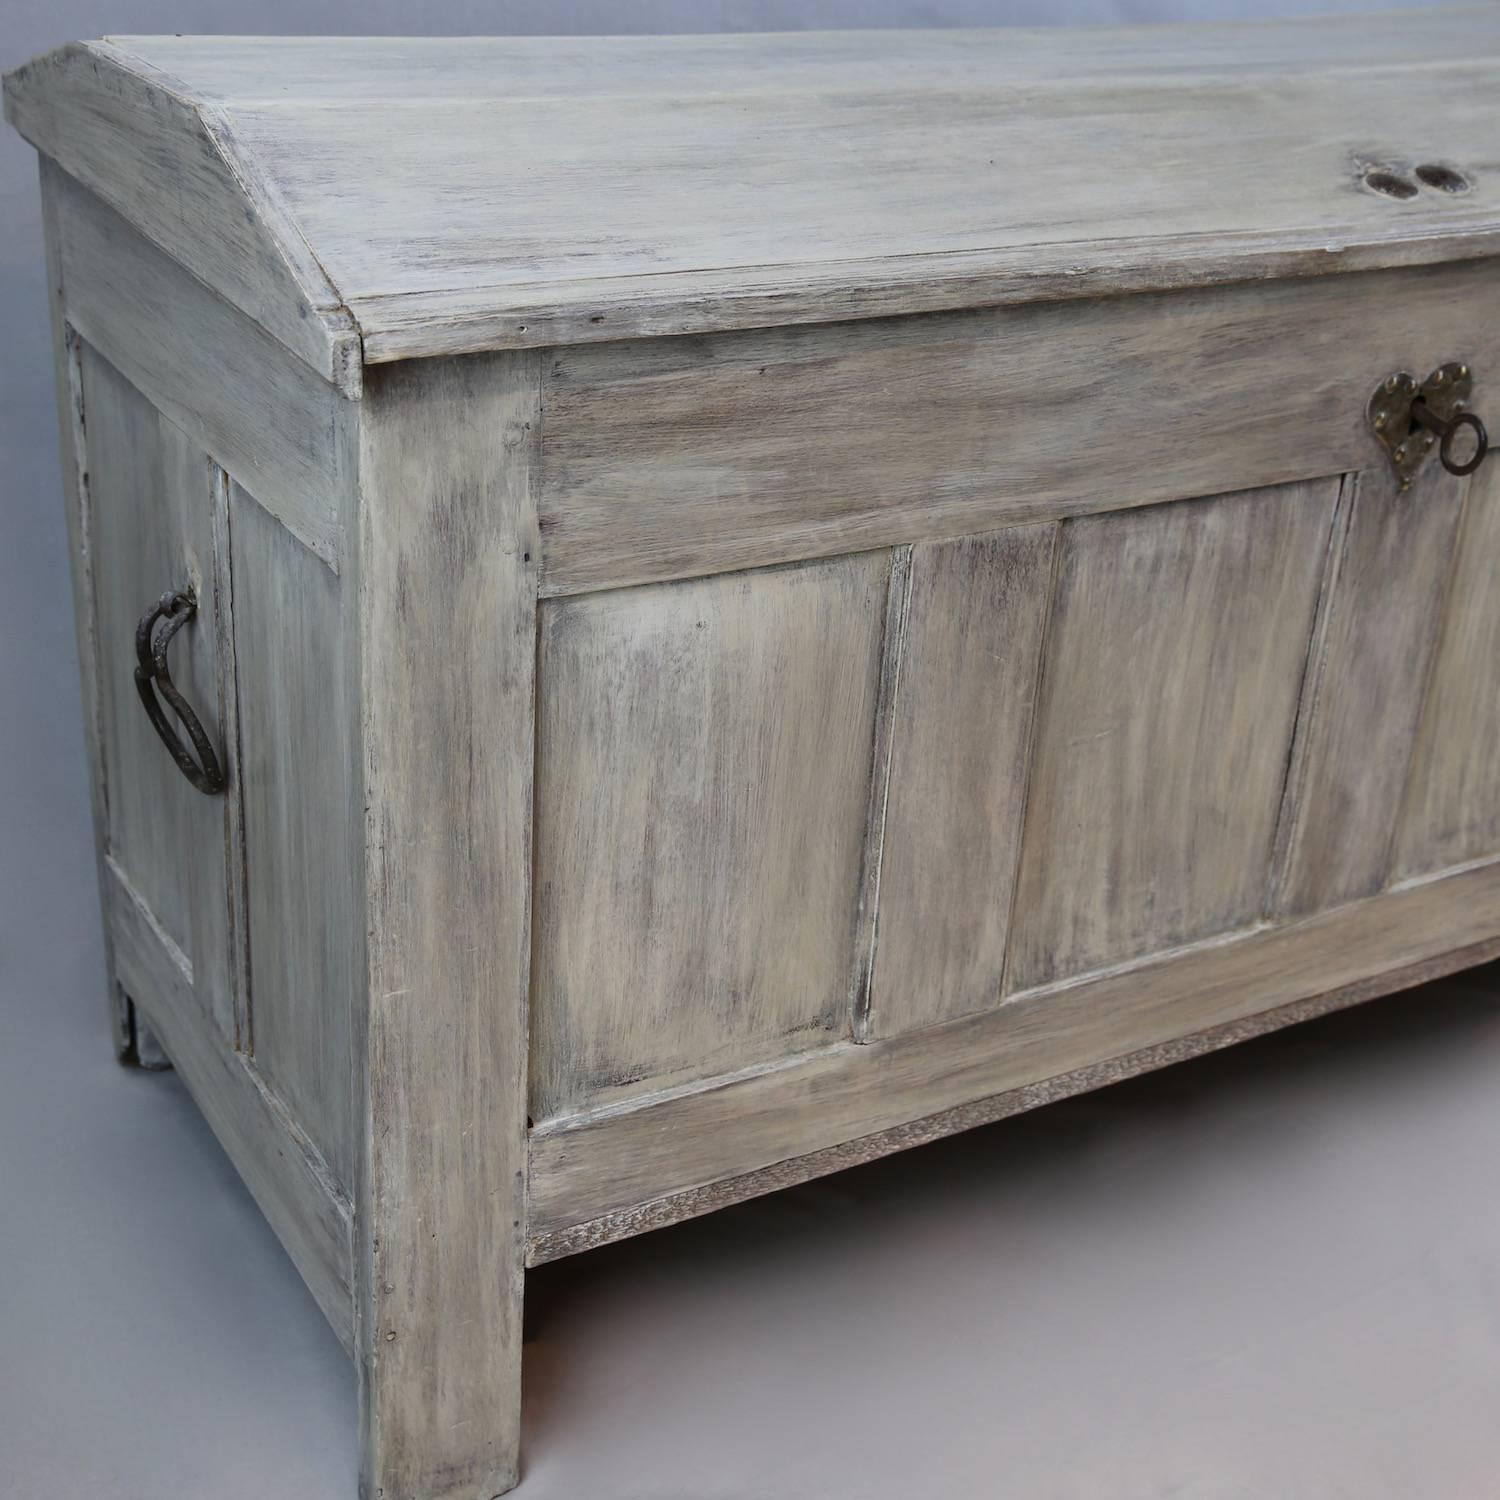 Close to your chest: A splendid late 1600s-early 1700s English oak chest with later paint finish. Having a quadruple panelled front, stile feet, iron side carrying handles, working lock and key, and a rather lovely, original, heart-shaped